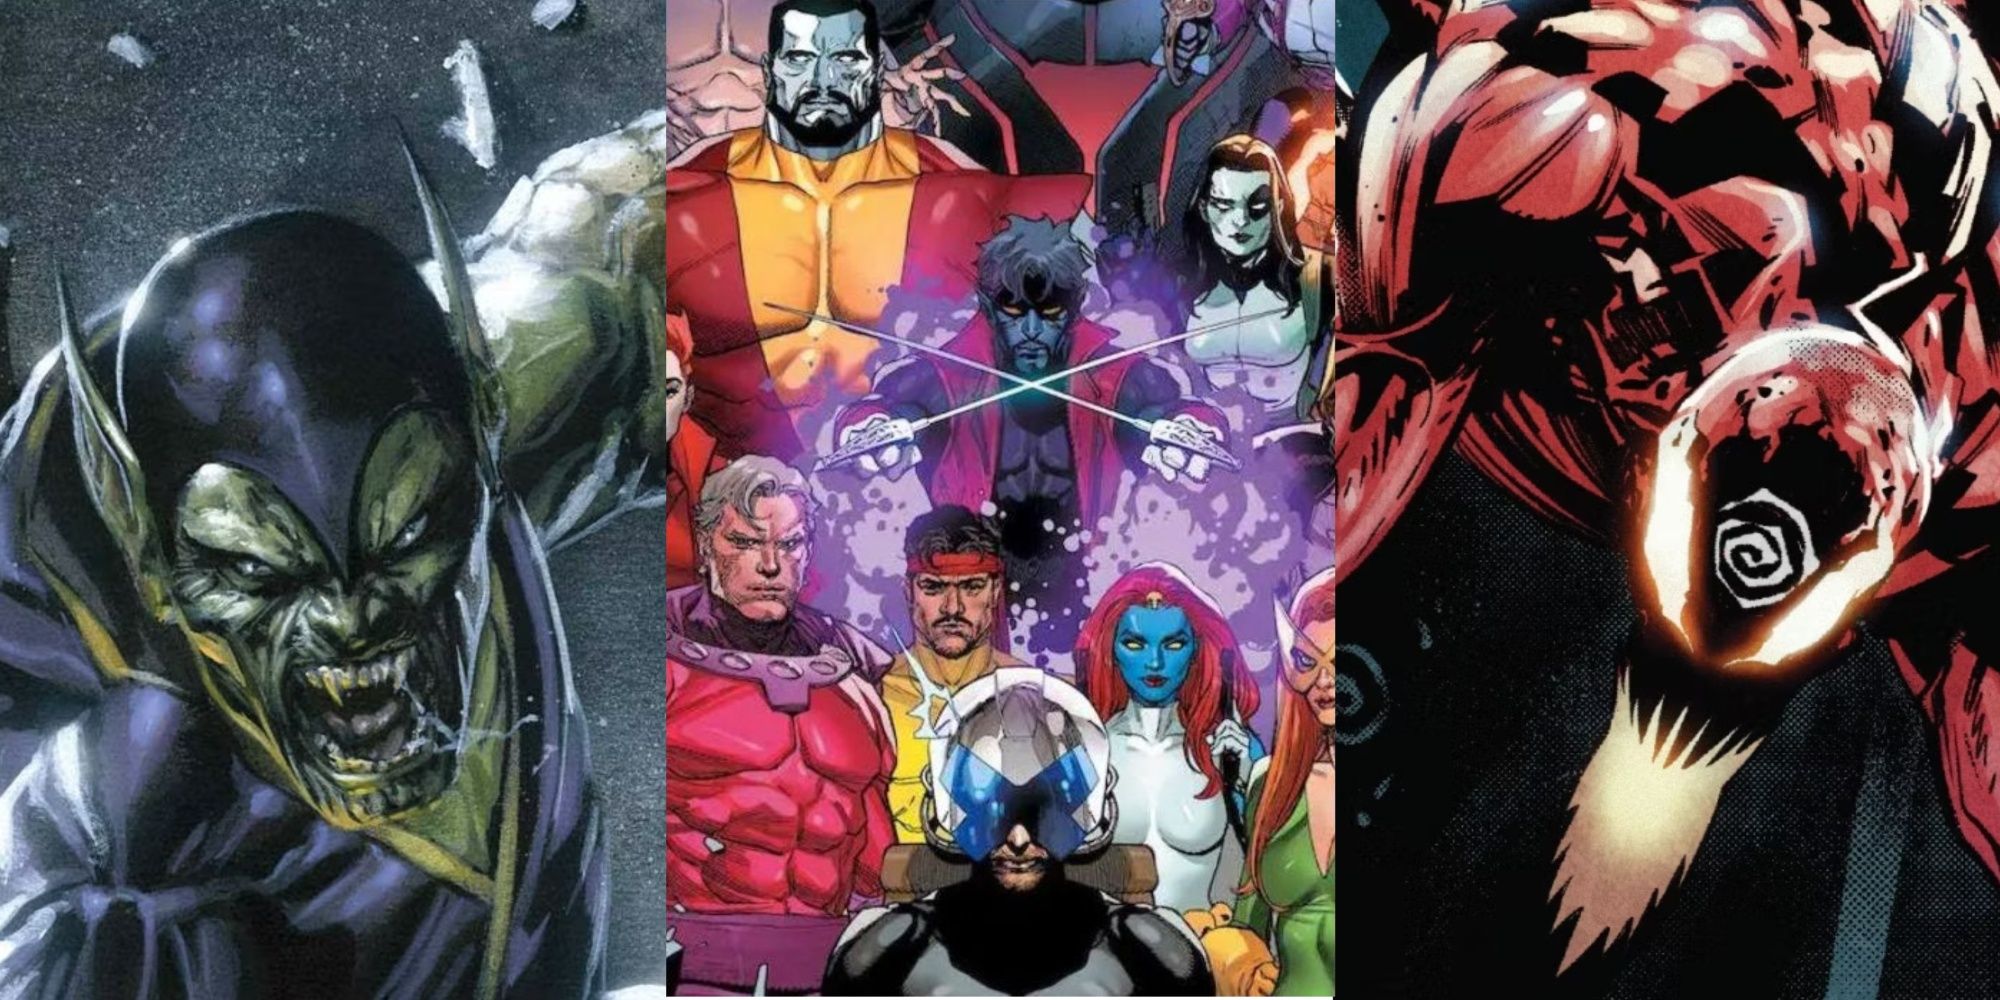 A split image of the Super Skrull, the X-Men, and Carnage in Marvel Comics